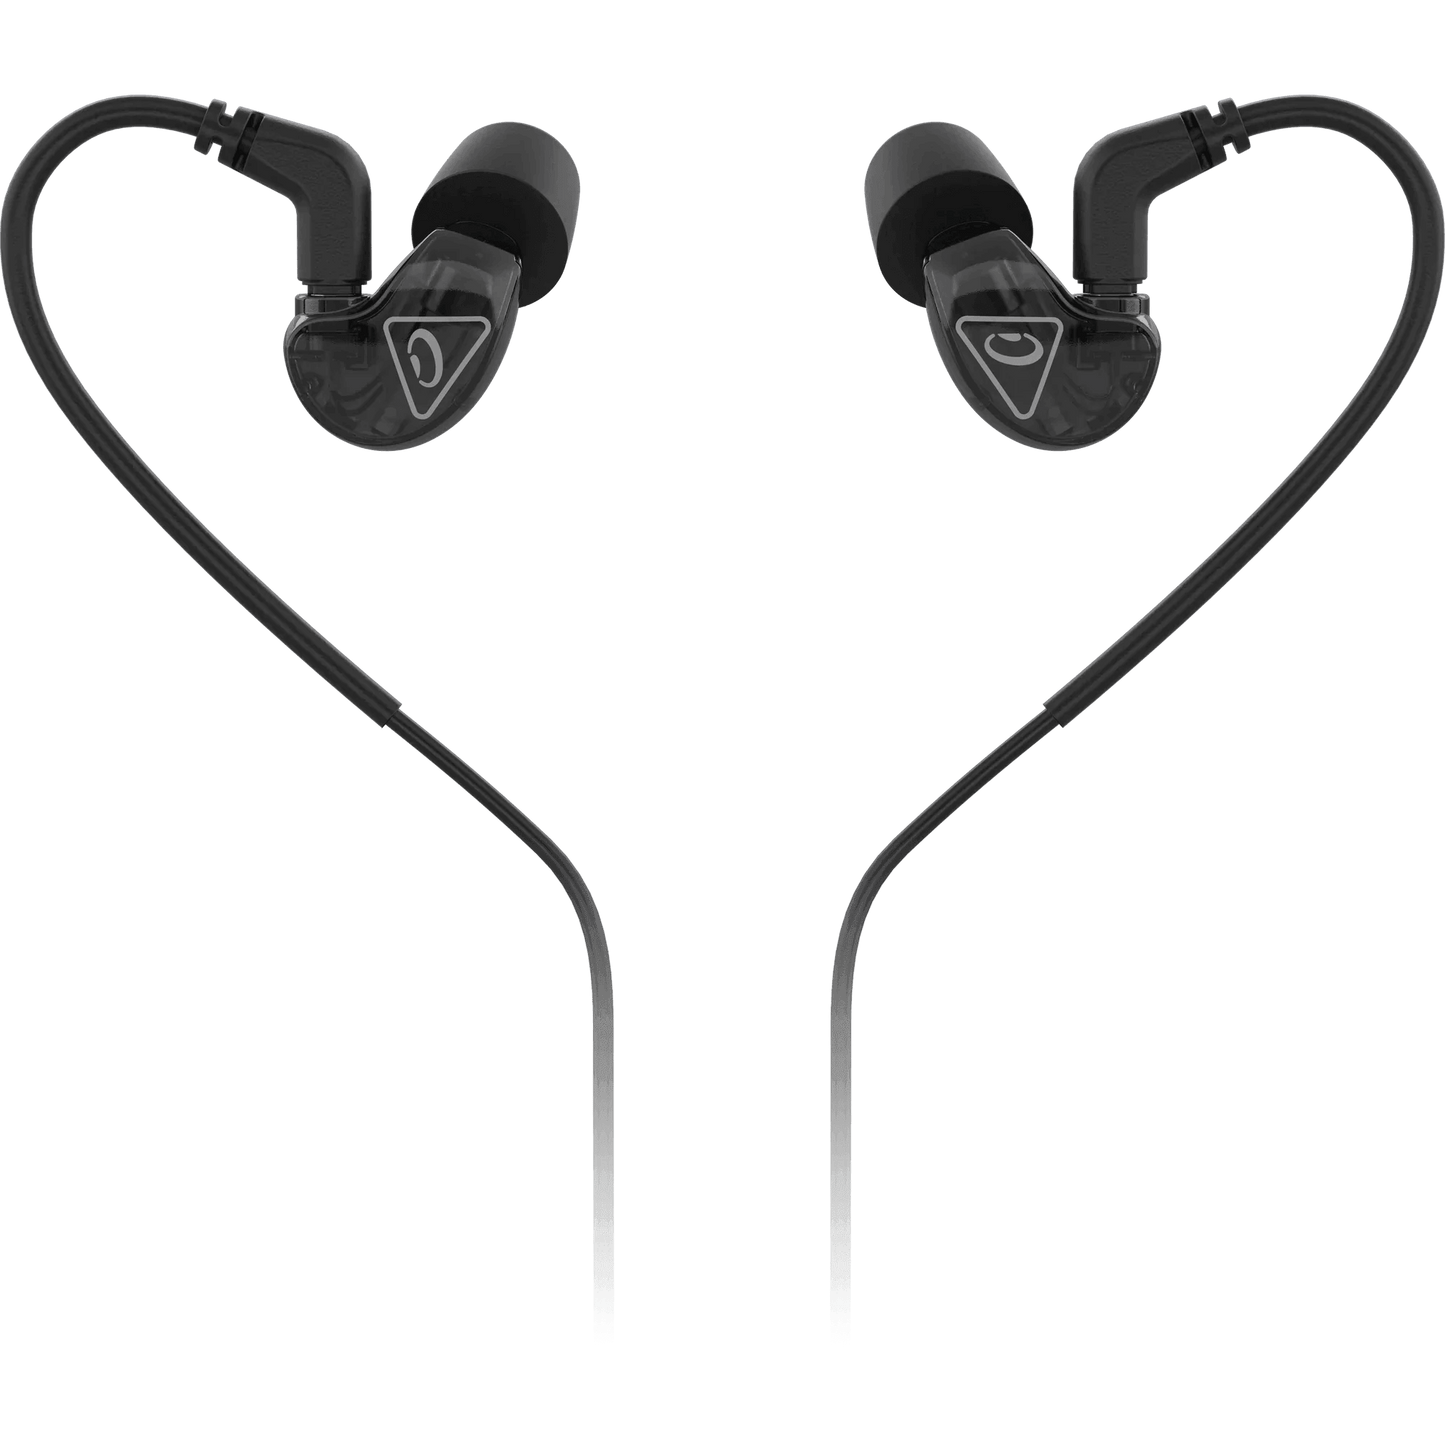 Behringer SD251-BT Studio Monitoring Earphones with Bluetooth* Connectivity